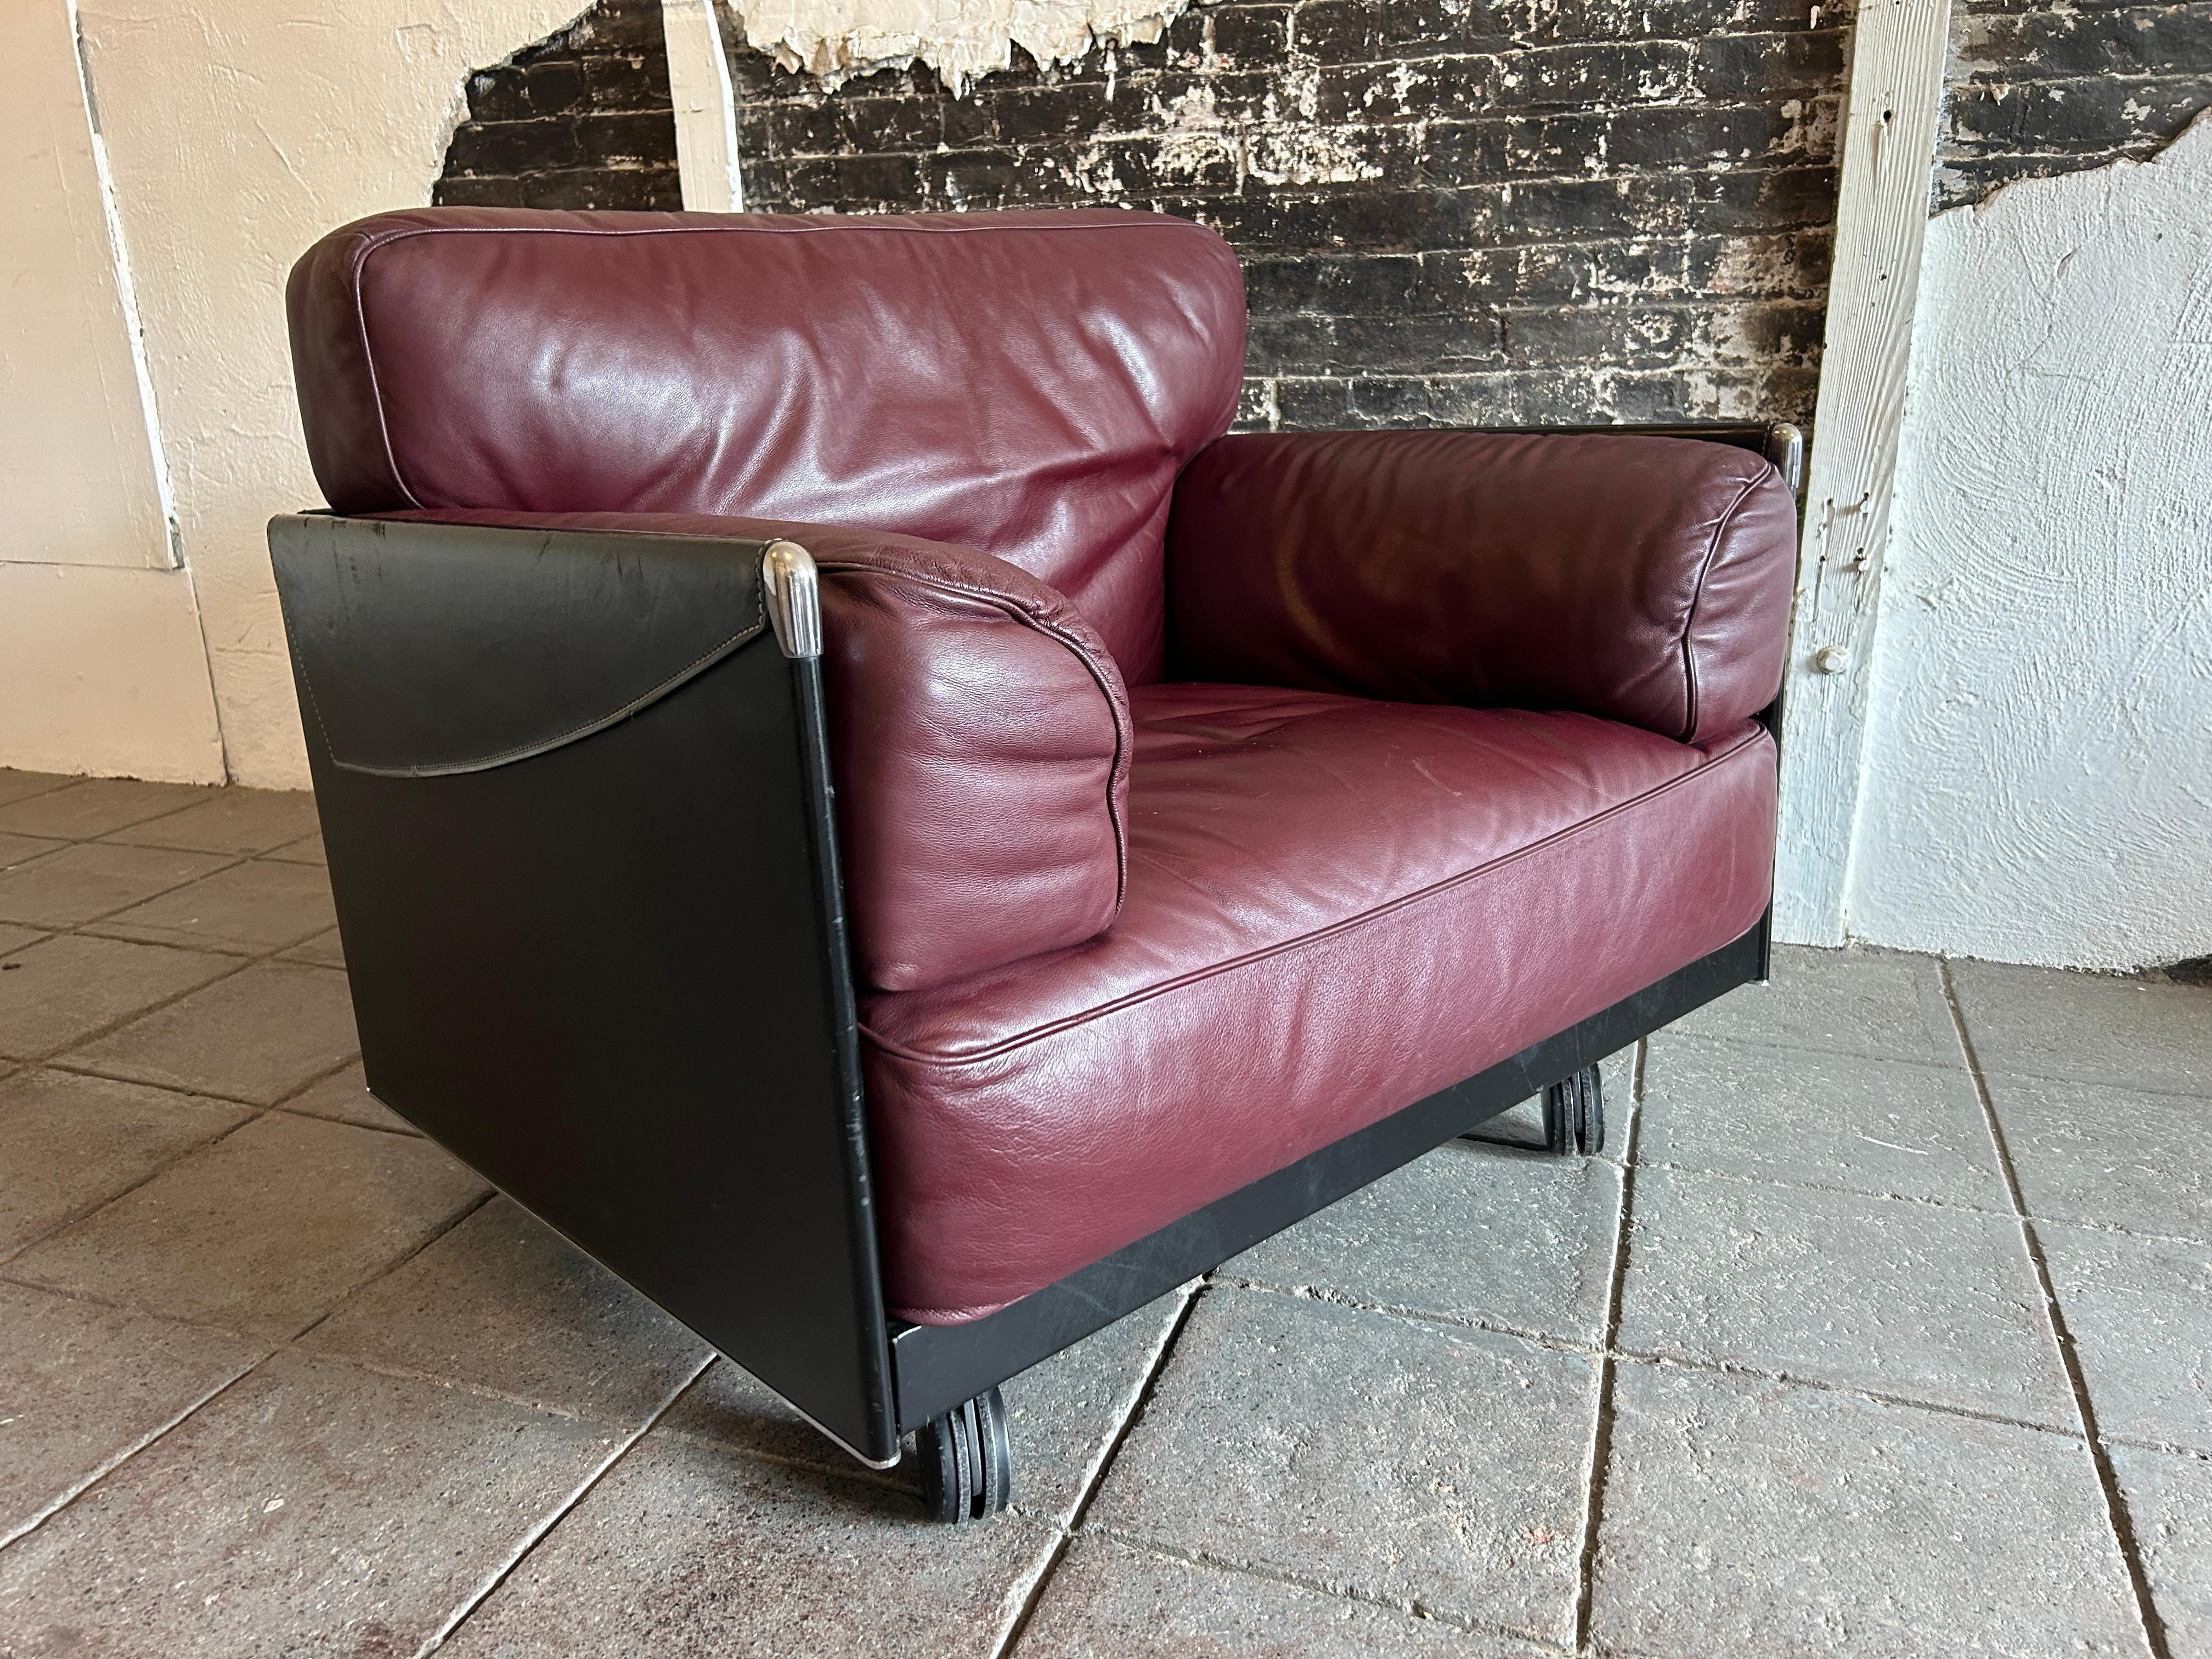 Vintage Mid-Century Modern Maroon leather Lounge chair by Tito Agnoli for Poltrona Frau Italy, circa 1970. Low Modern designed lounge chair with 2 front caster and 2 rear legs - Very soft Maroon leather puffy cushions. Super comfortable chair with